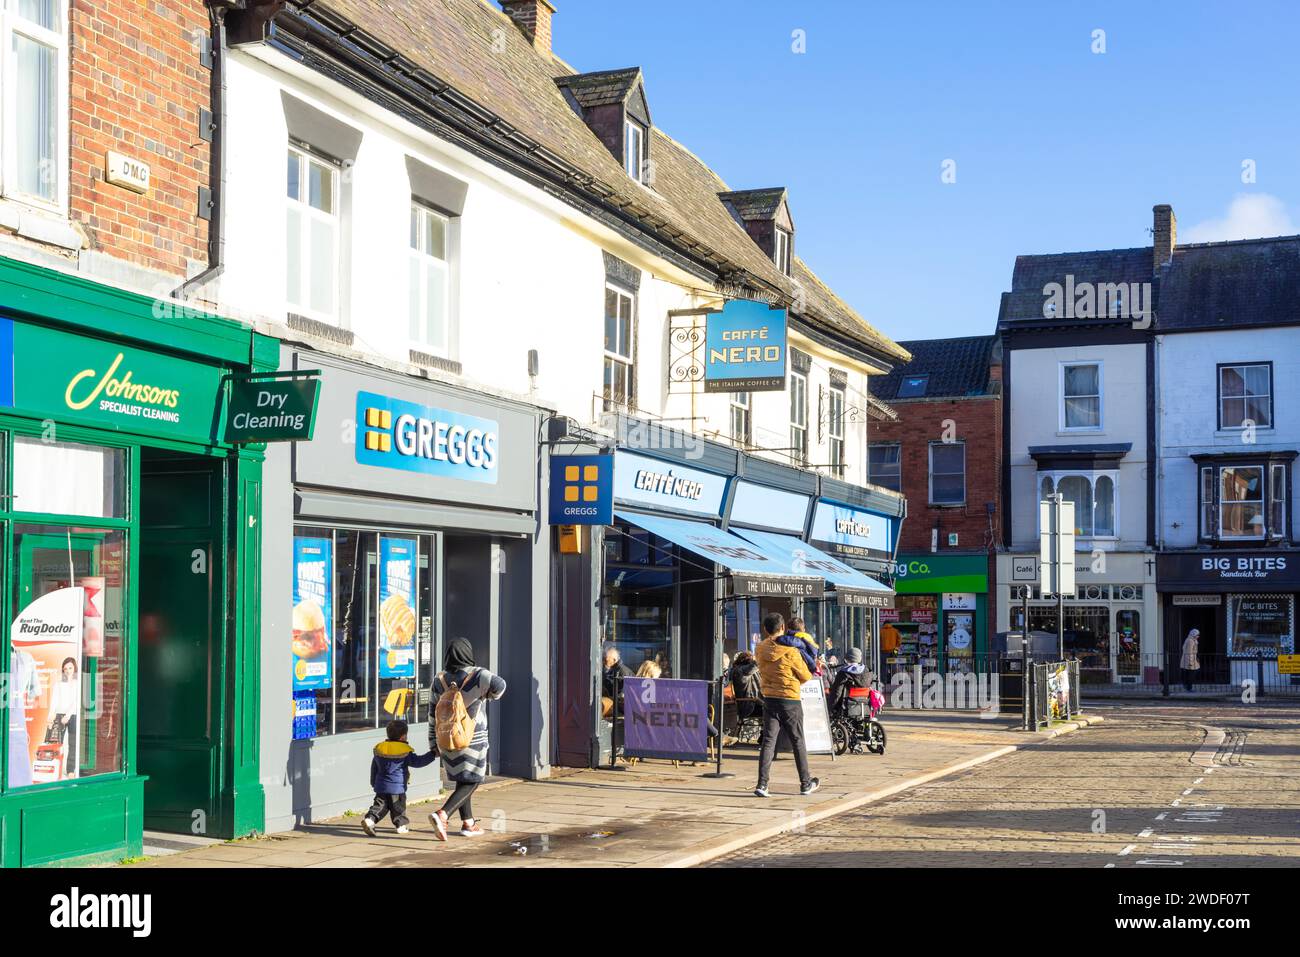 Ripon Market Place North Greggs bakery and Caffe Nero coffee shop with other local Shops in Ripon North Yorkshire England UK GB Europe Stock Photo